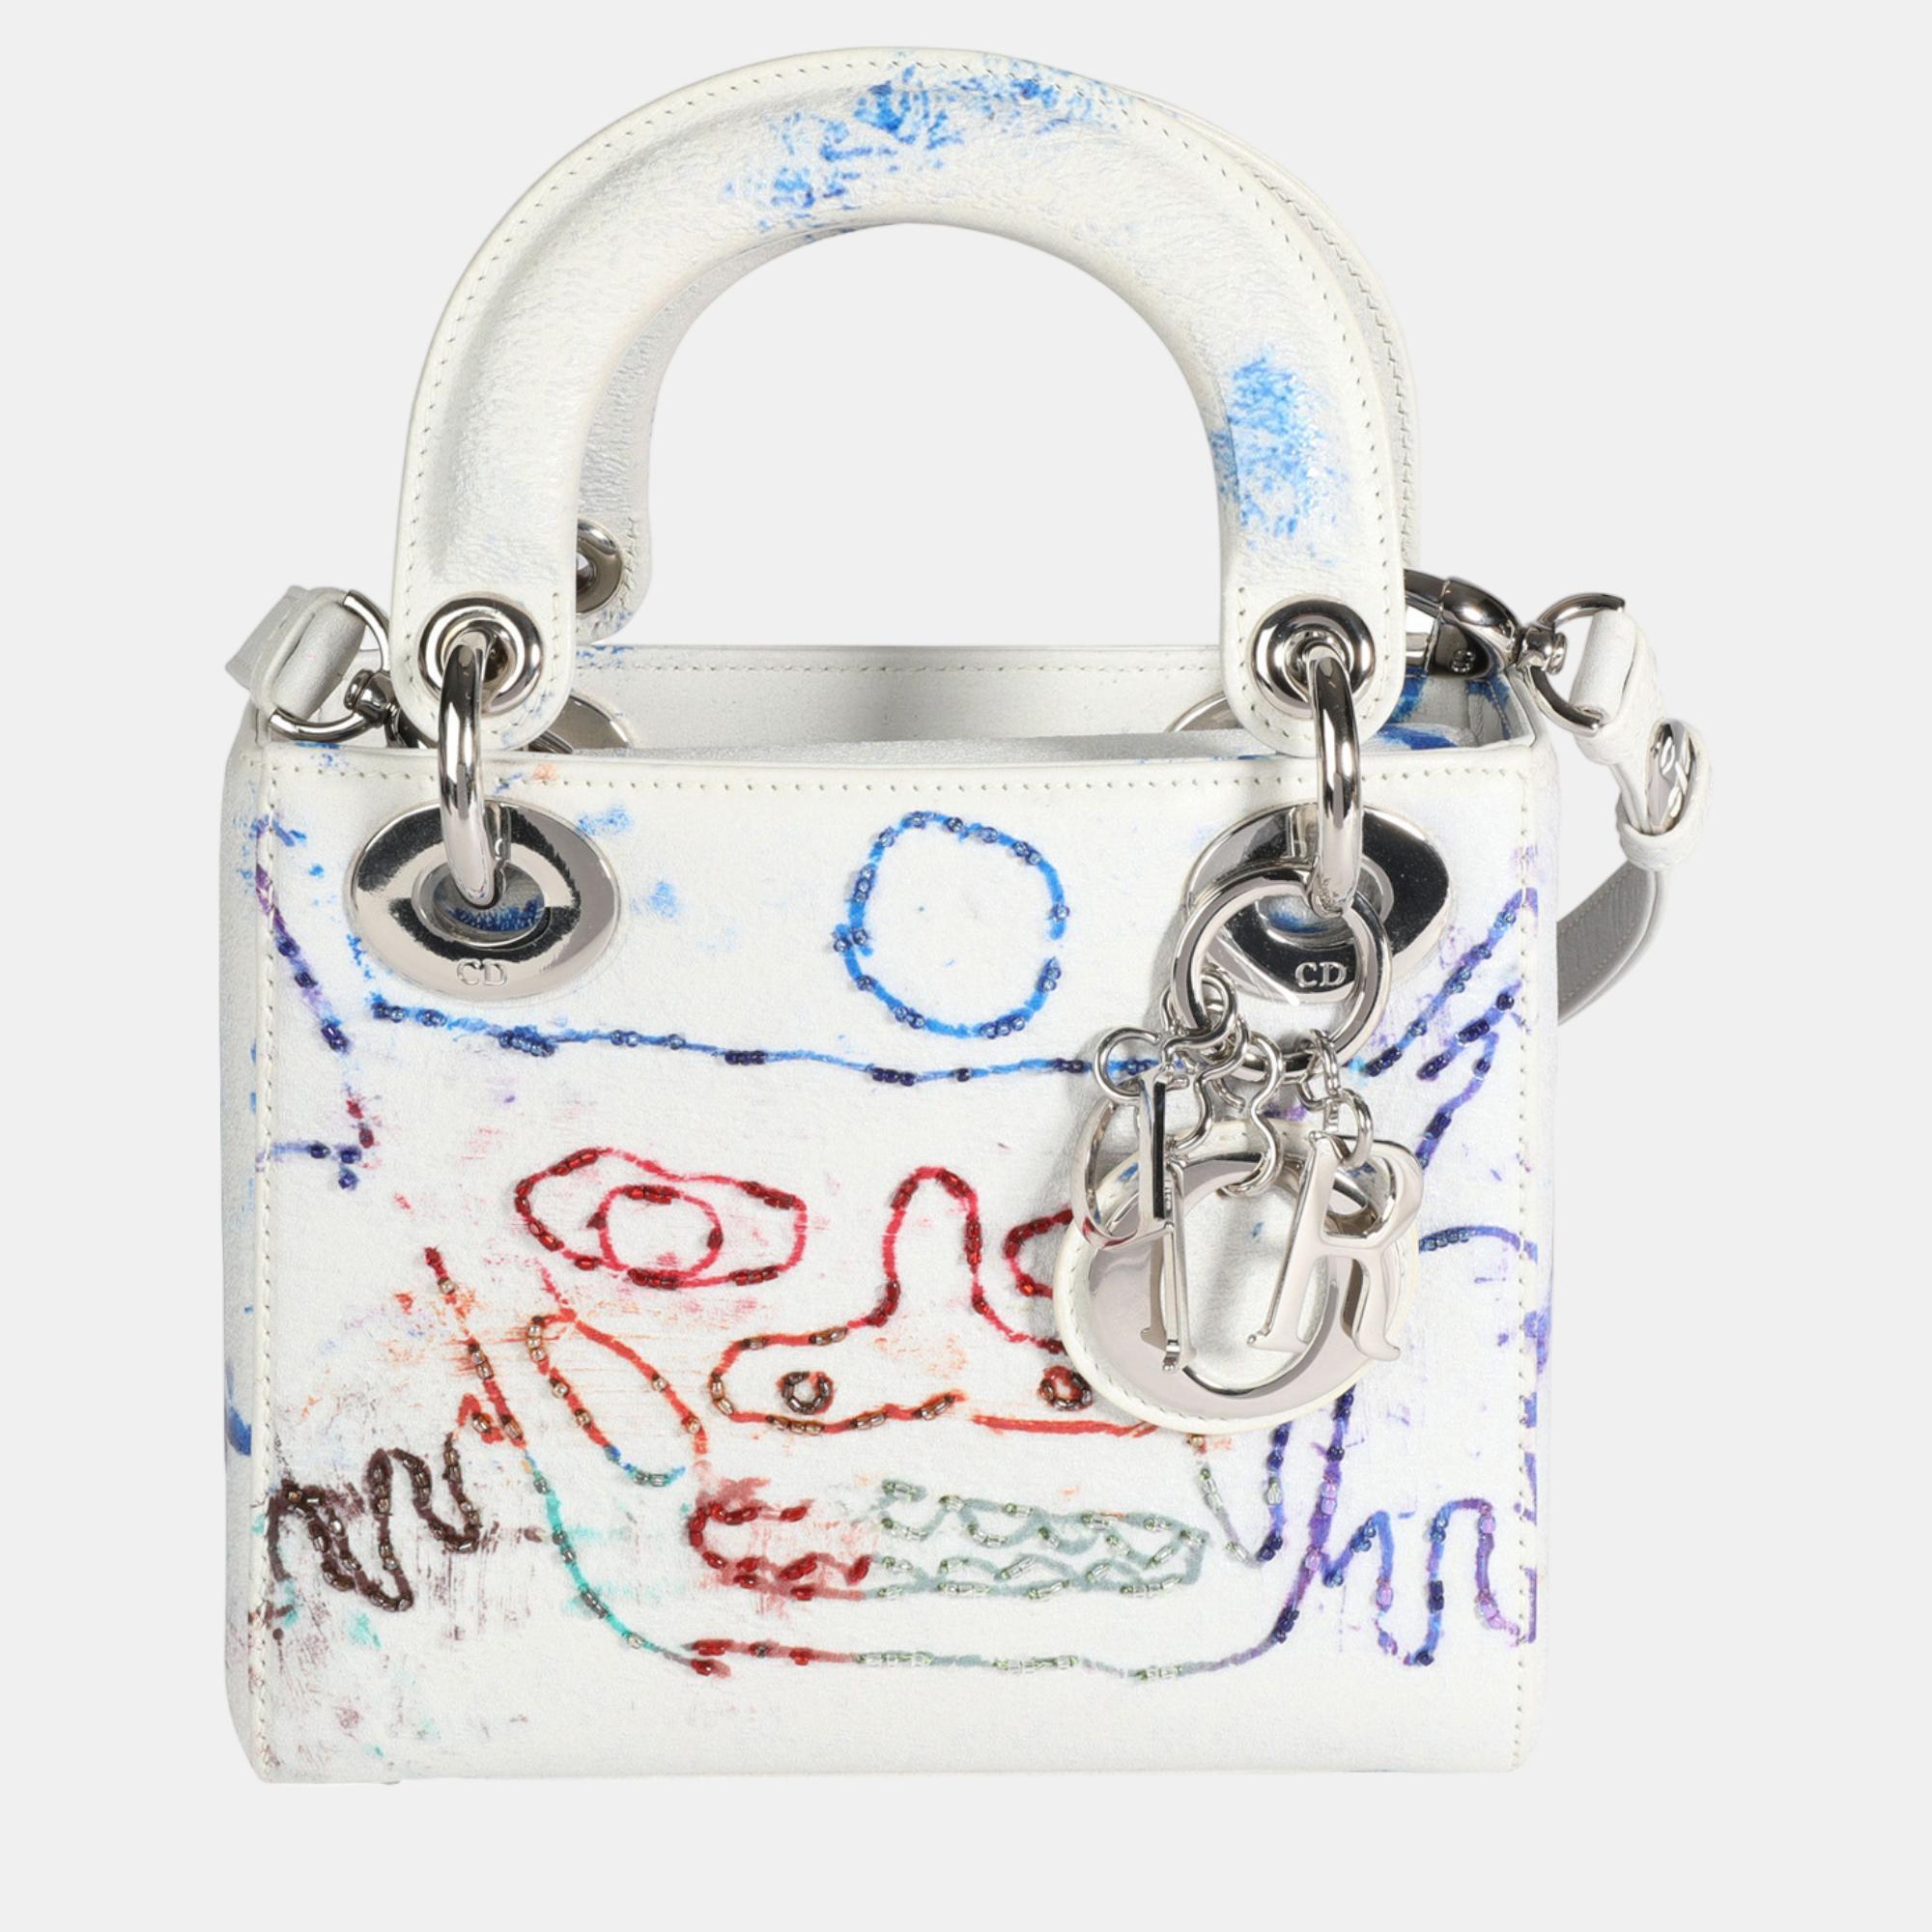 Dior x spencer white leather sweeney limited edition multicolor mini lady dior top handle bag